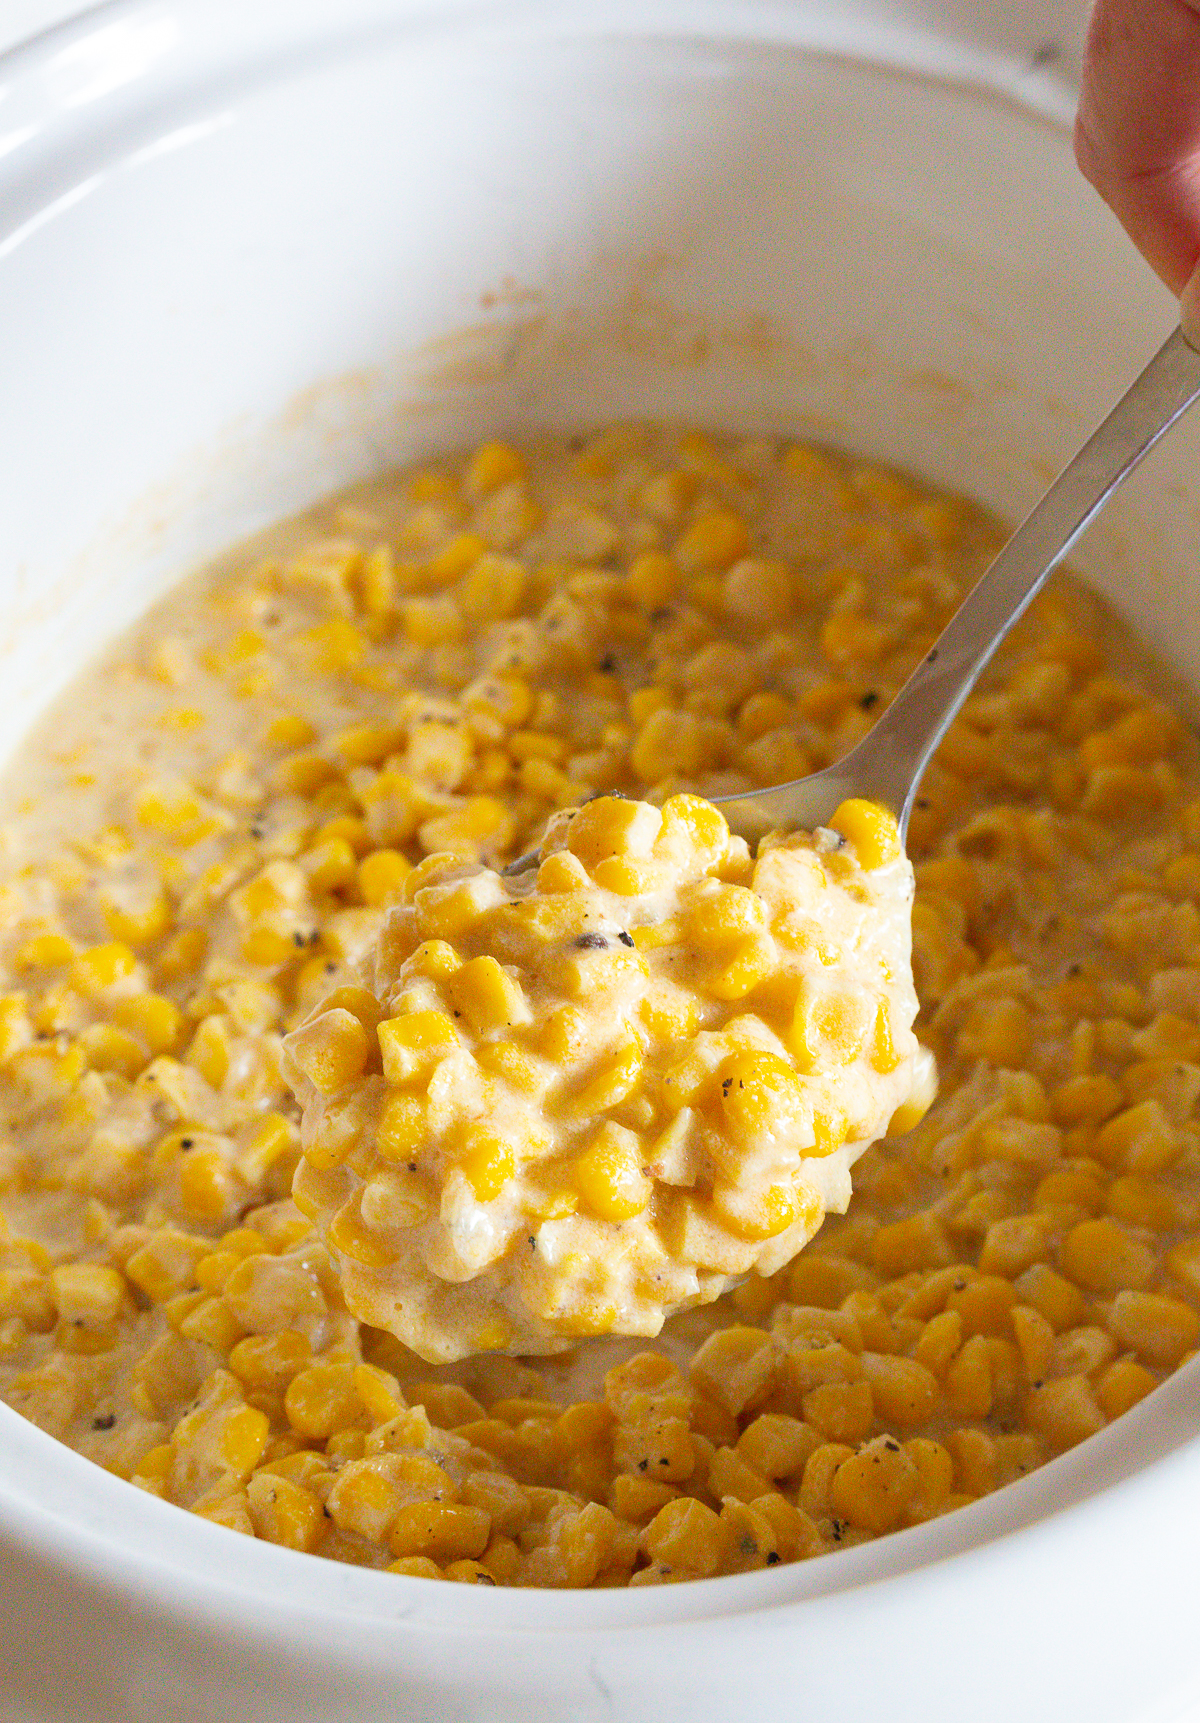 Slow Cooker Creamed Corn Recipe #ASpicyPerspective #corn #thanksgiving #holidays #southern #crockpot #slowcooker